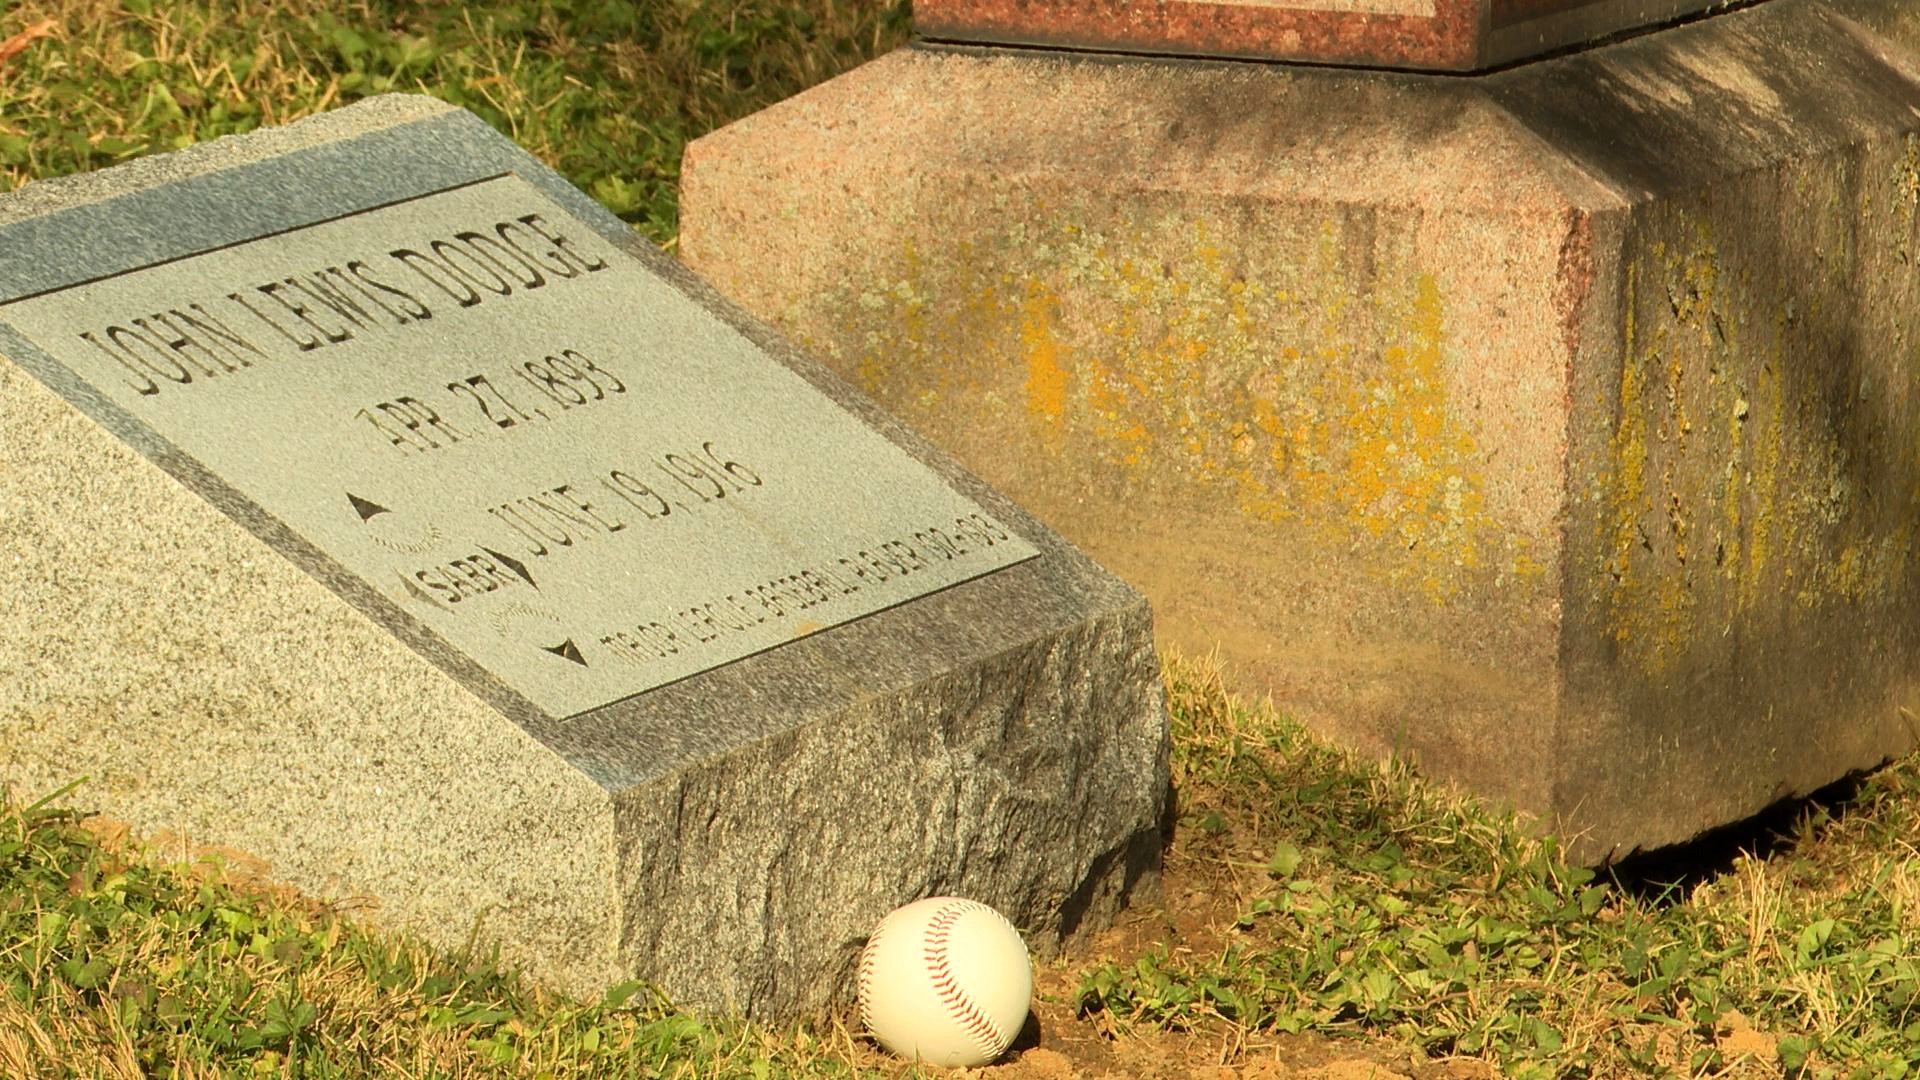 John Lewis Dodge was killed by a pitch in 1916. He was honored with a marker by the Society of American Baseball Research.